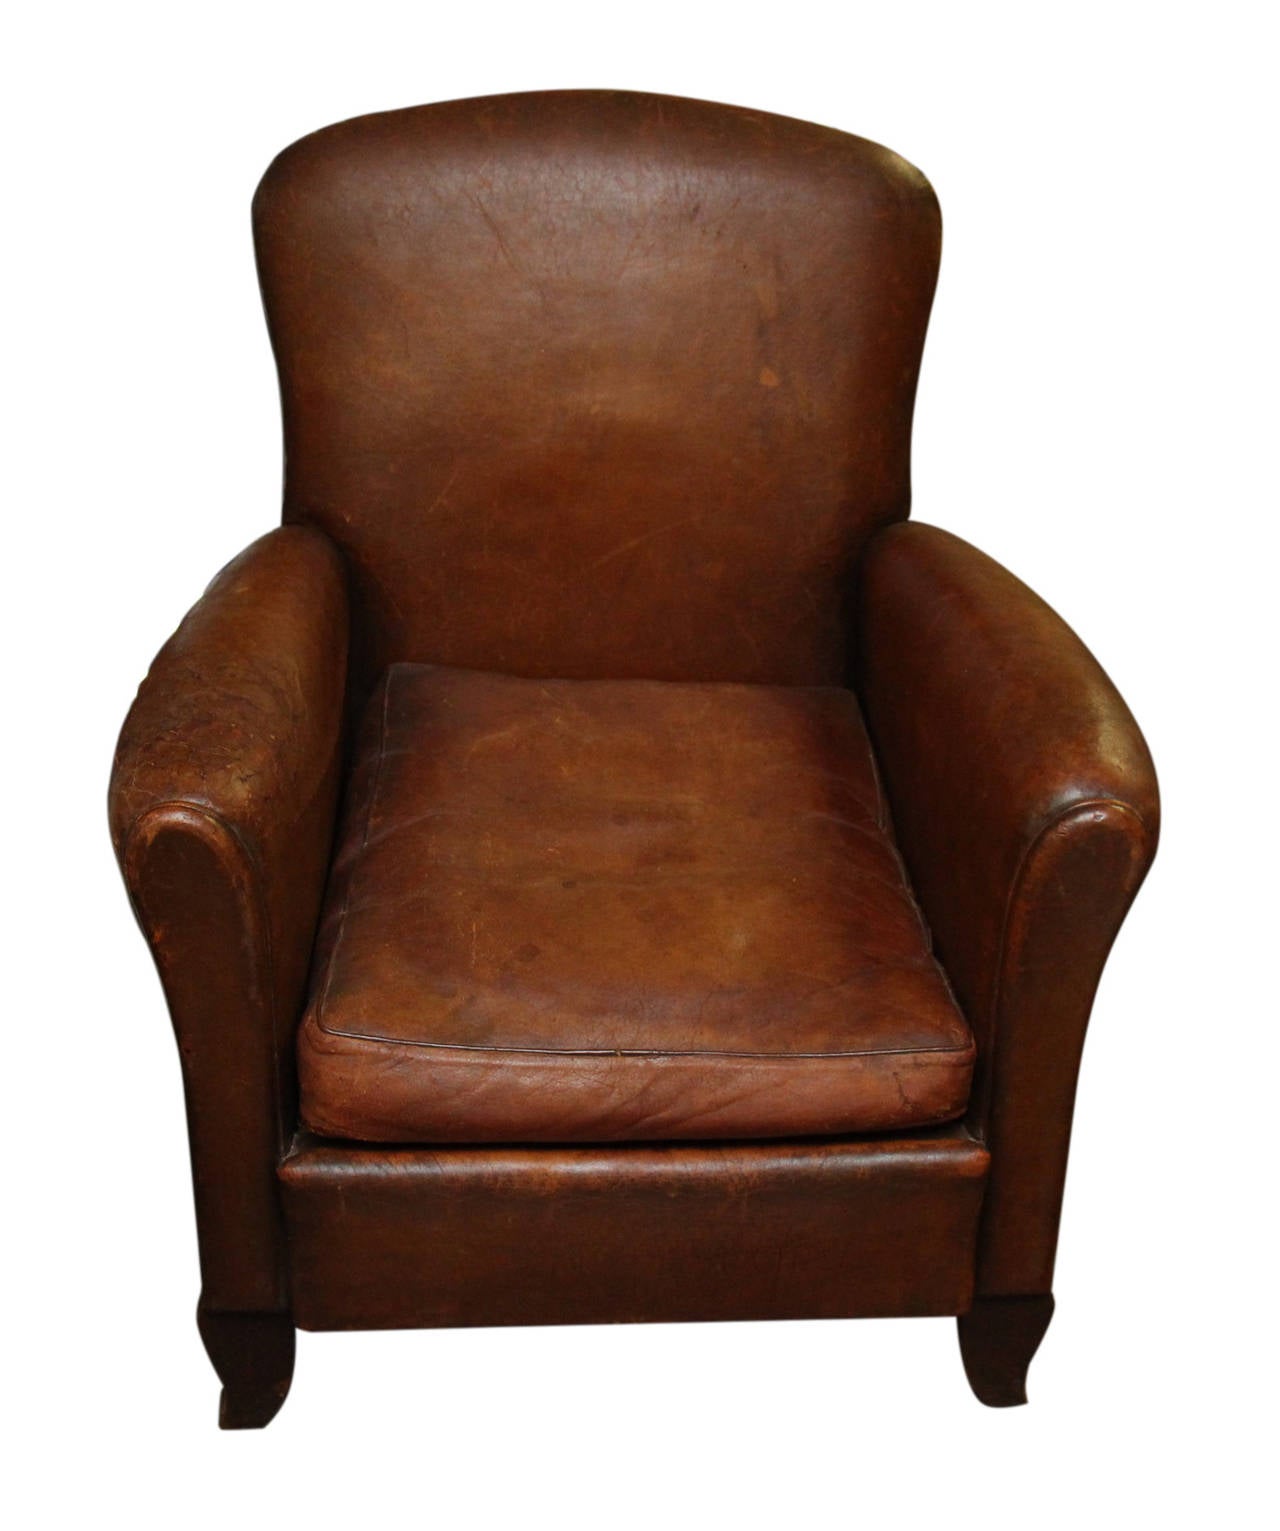 Petite Art Deco leather club chair. This chair sits on four wooden legs and is light brown in color. The arms are small and rounded with a rounded corner back. This item can be viewed at our 400 Gilligan Street, Scranton, PA warehouse.